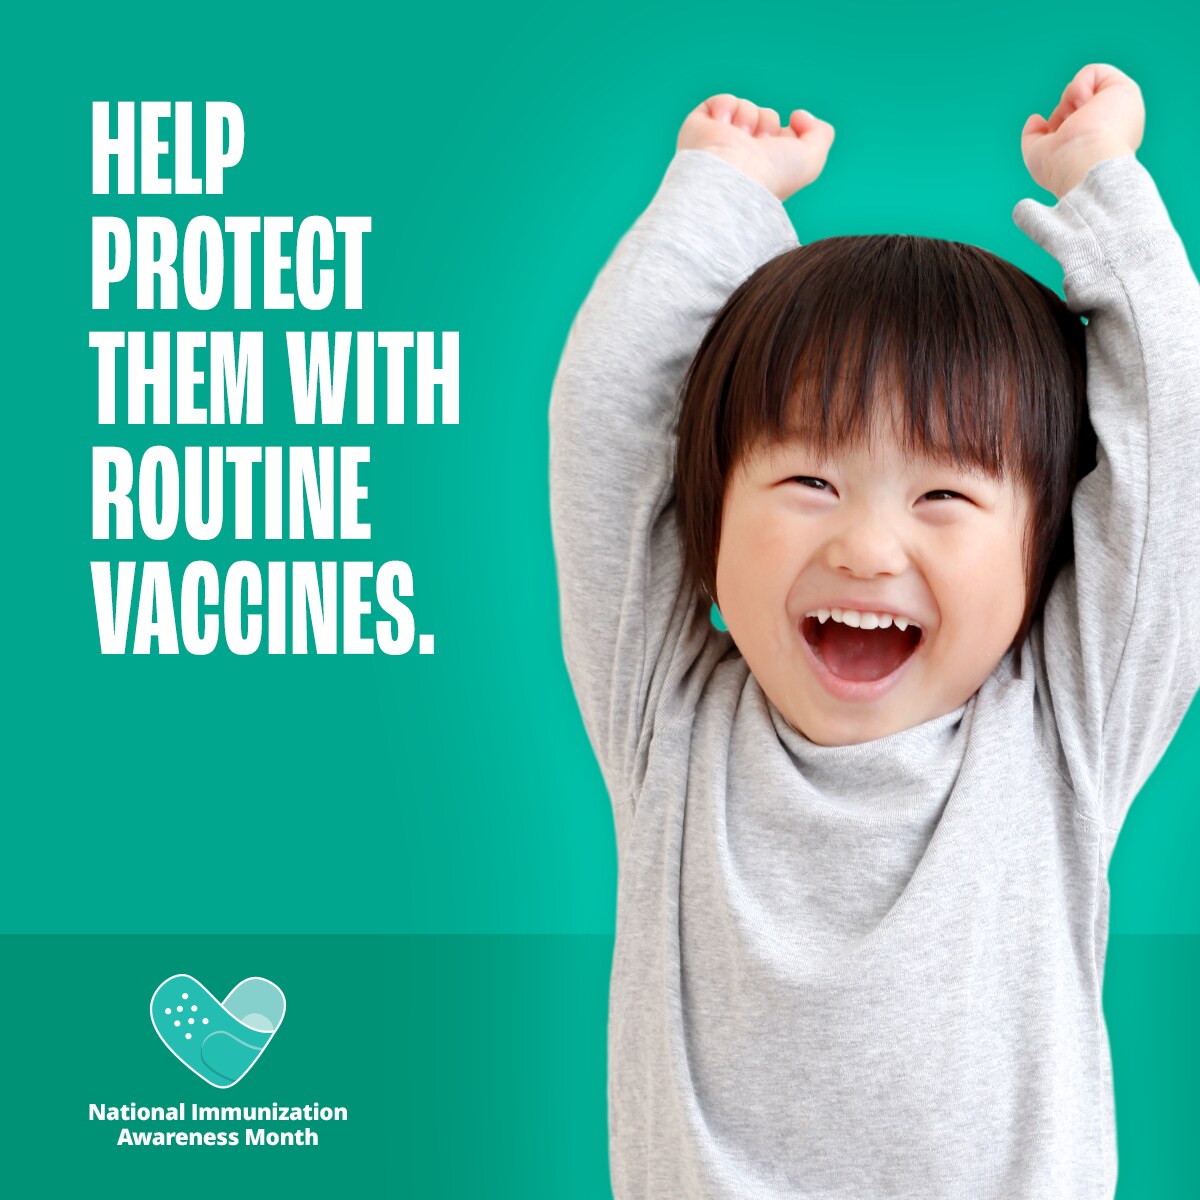 Help protect them with routine vaccines. National Immunization Awareness Month